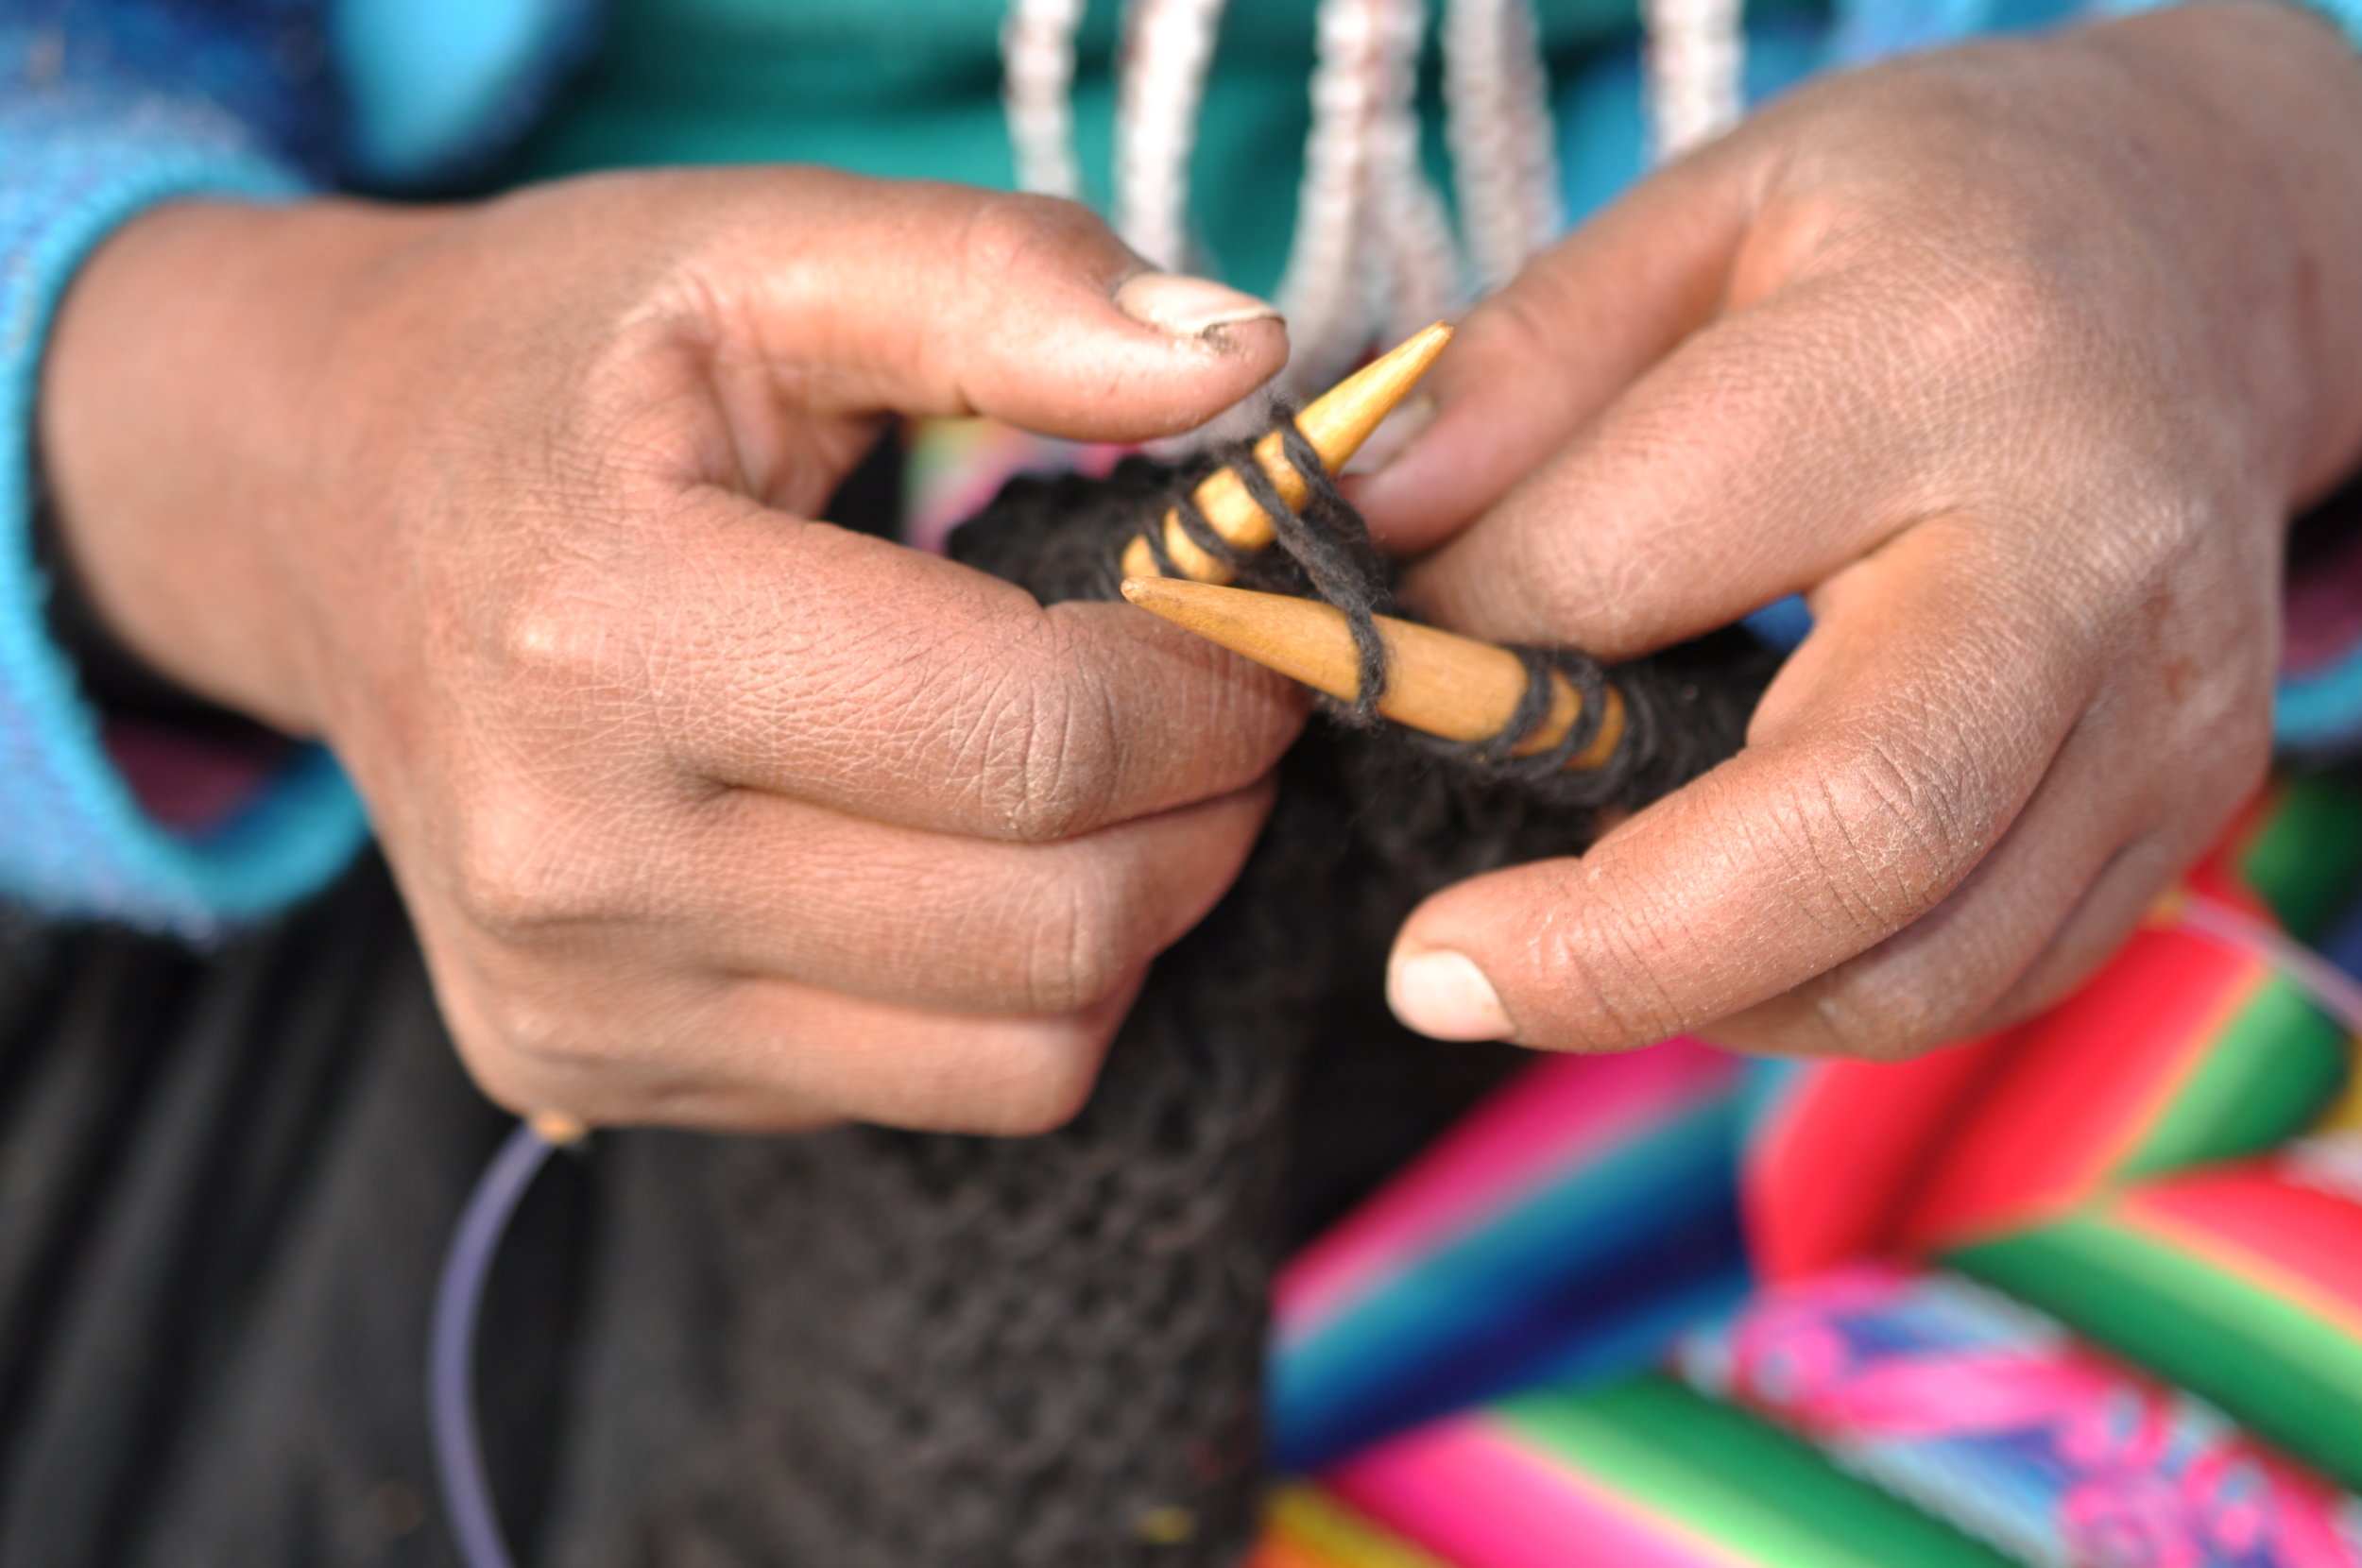 Once the yarn is ready, our talented artisans knit the beautiful pieces we share with you.